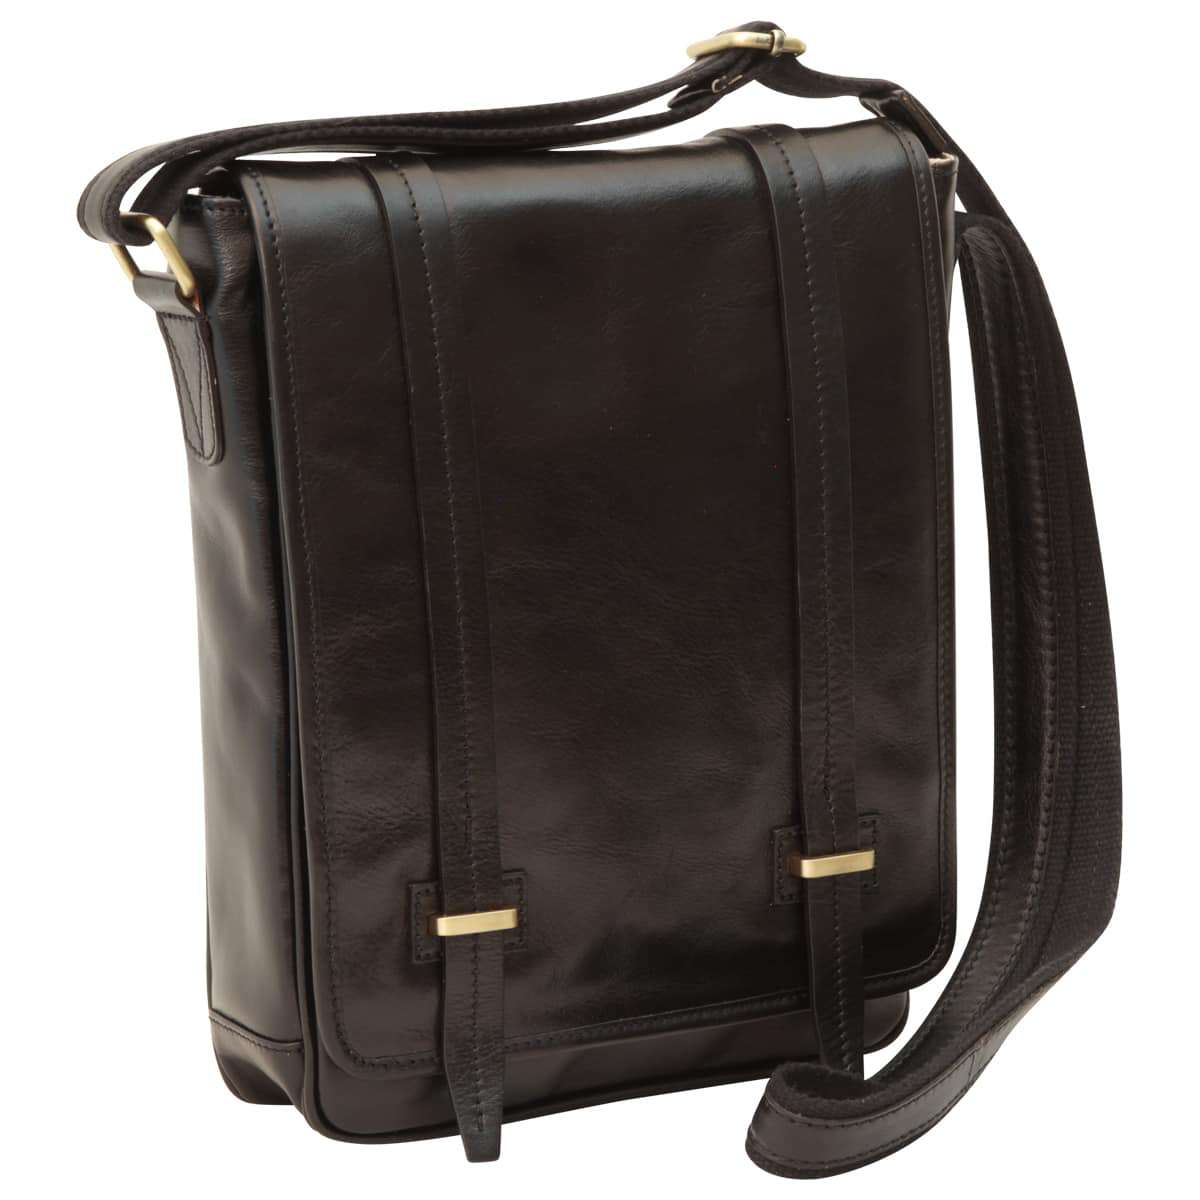 Medium leather bag with double magnetic closure - Black | 406589NE US | Old Angler Firenze